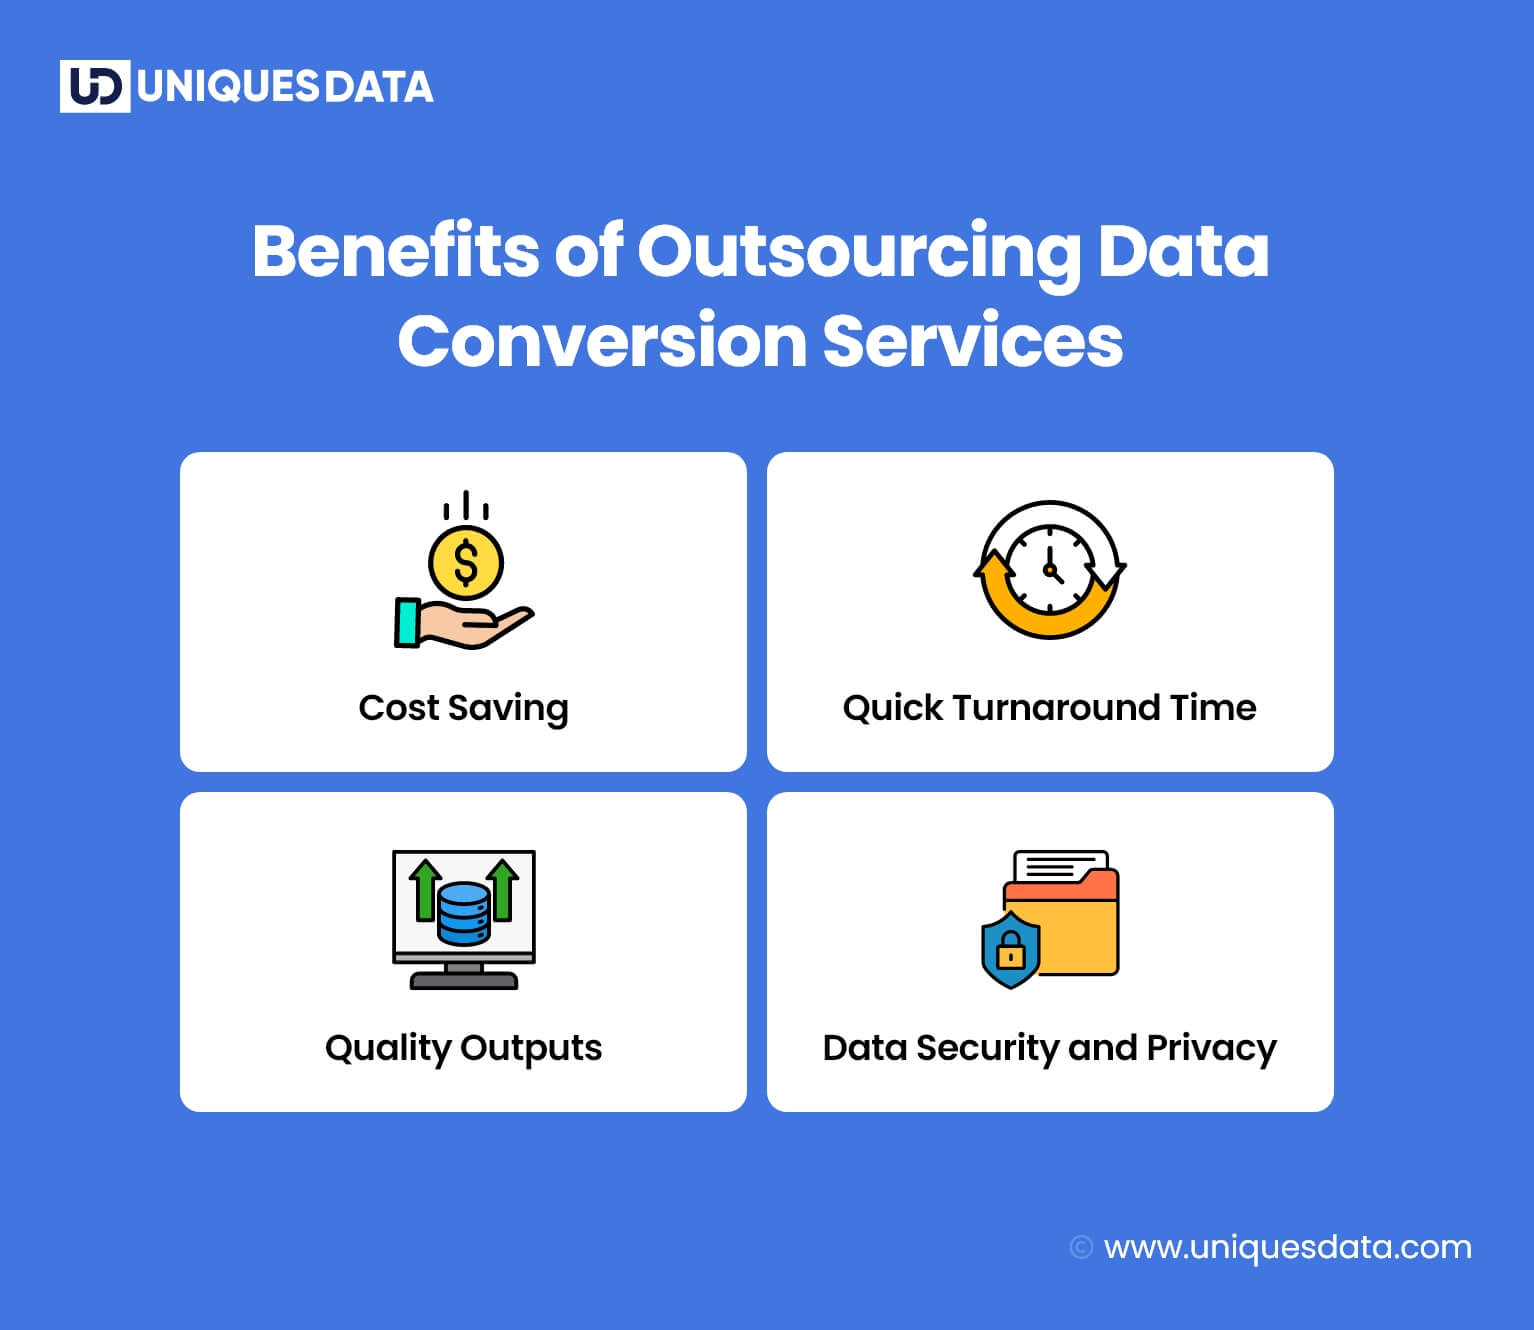 Benefits of Outsourcing Data Conversion Services